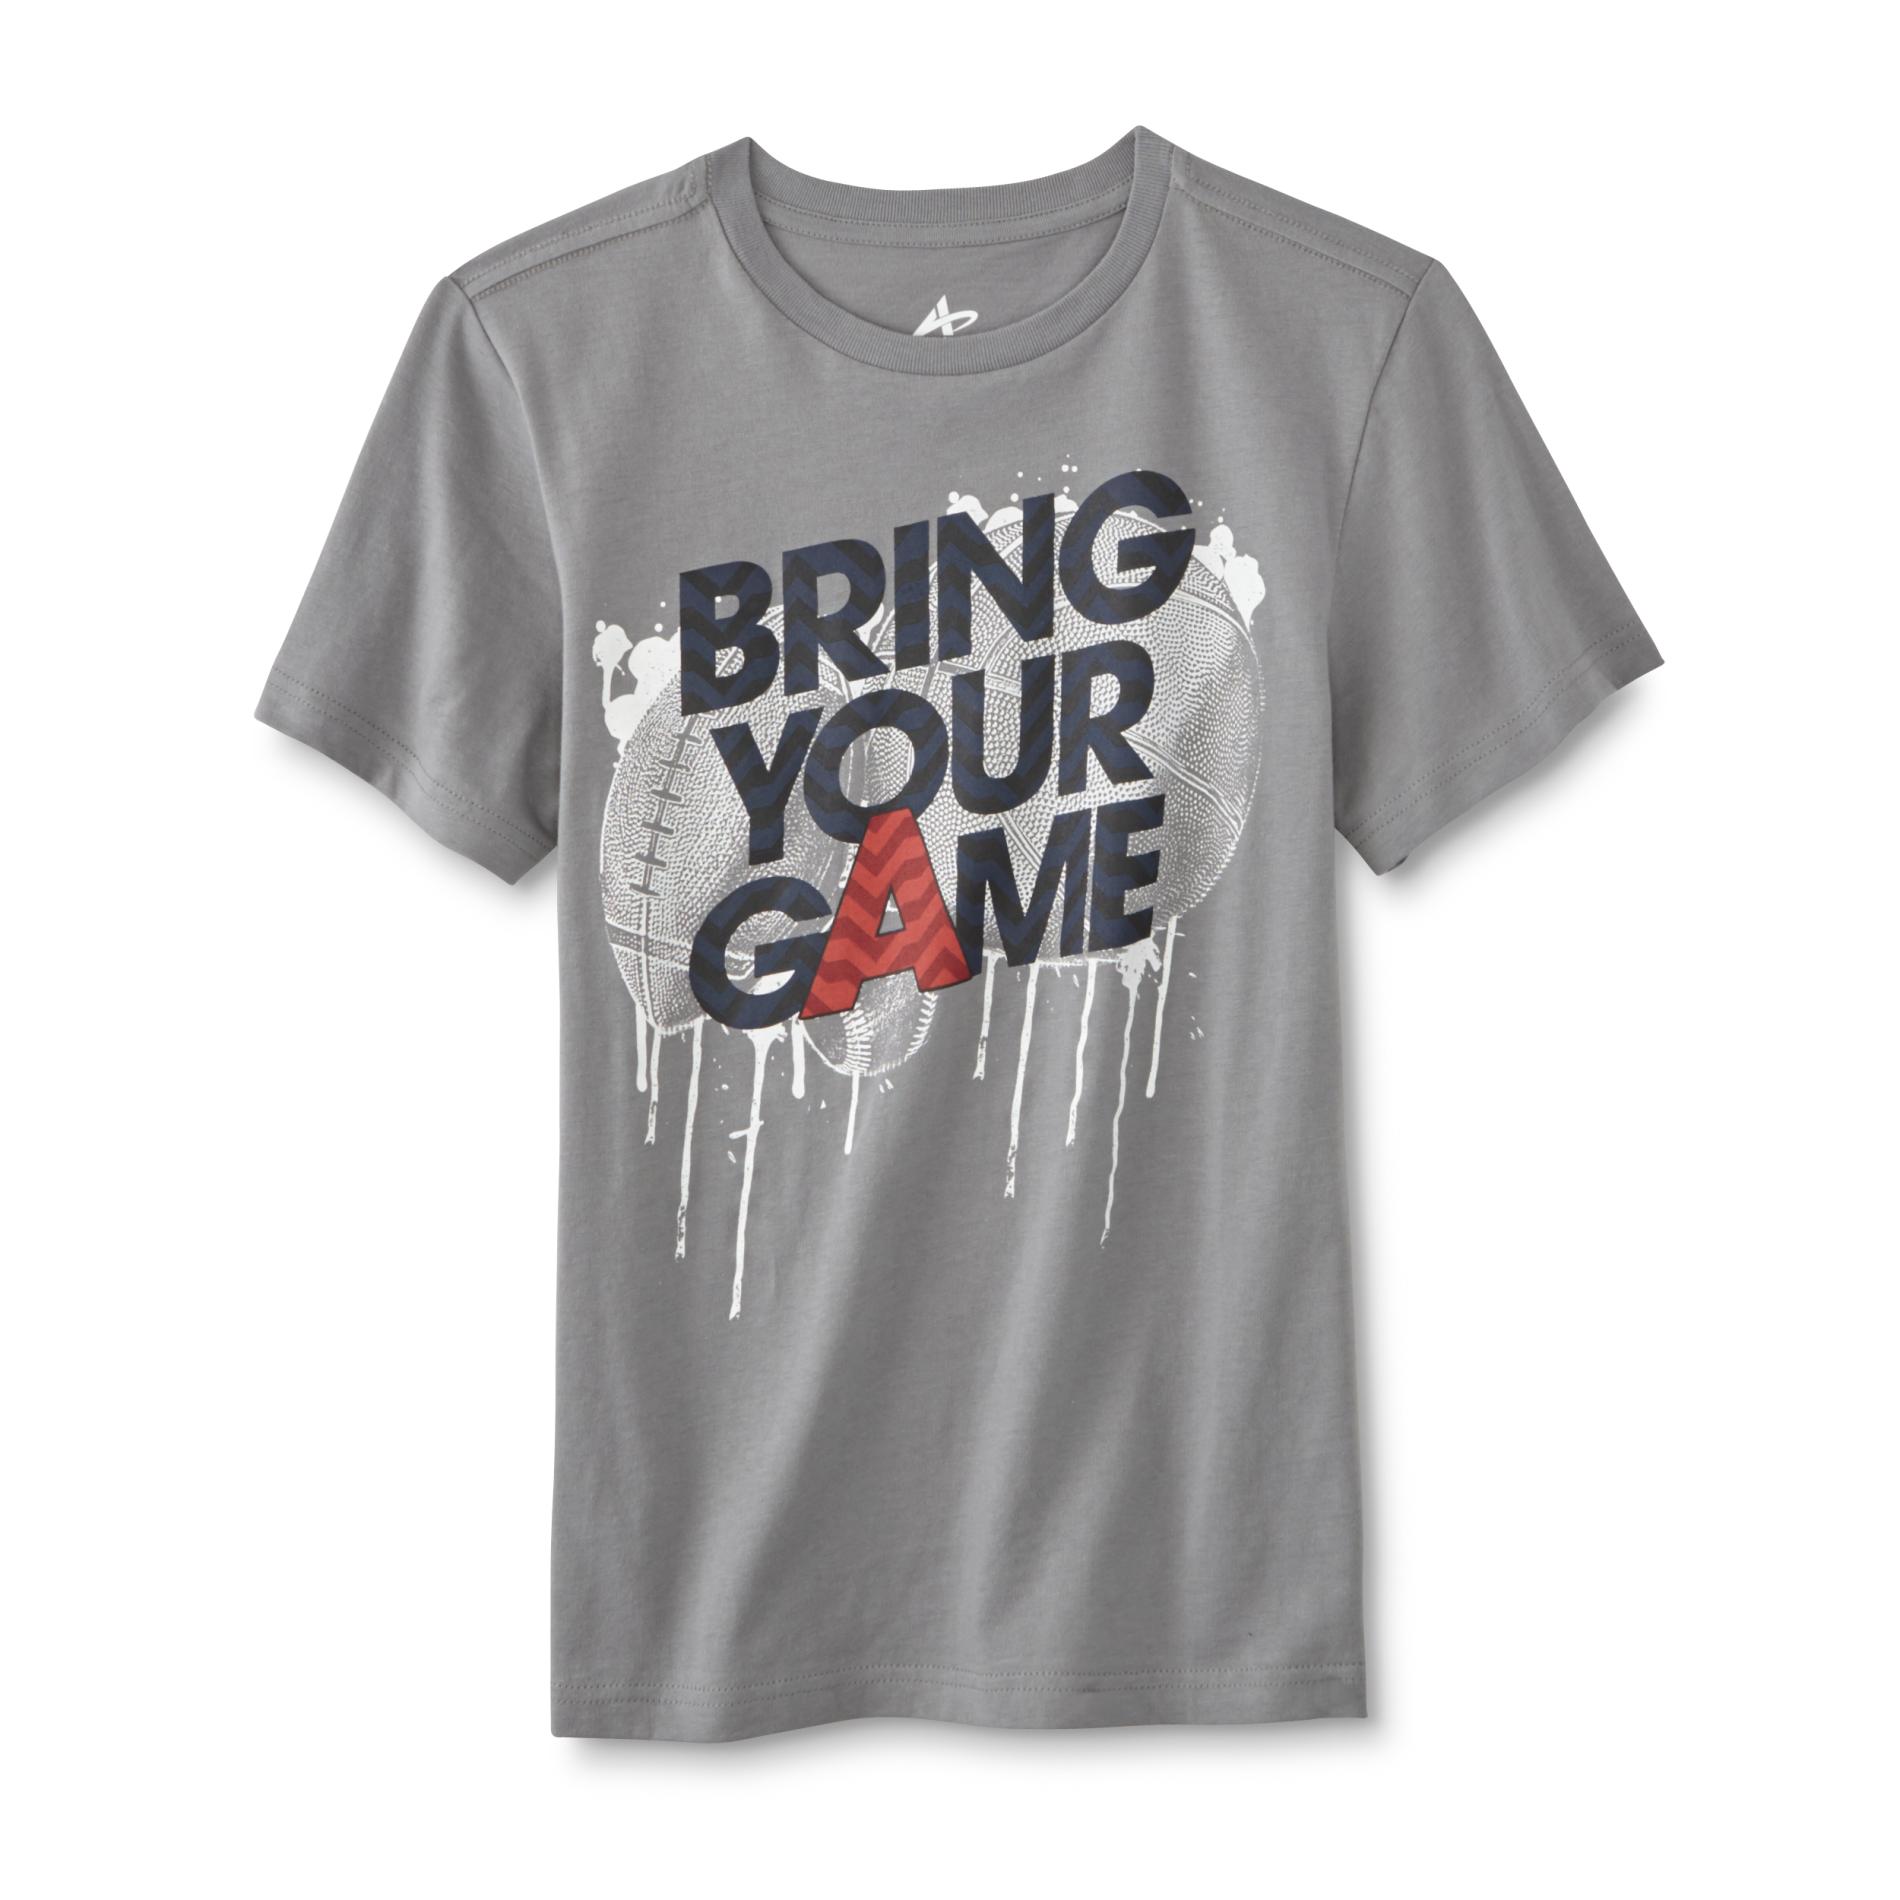 Athletech Boy's Graphic T-Shirt - Bring Your A Game